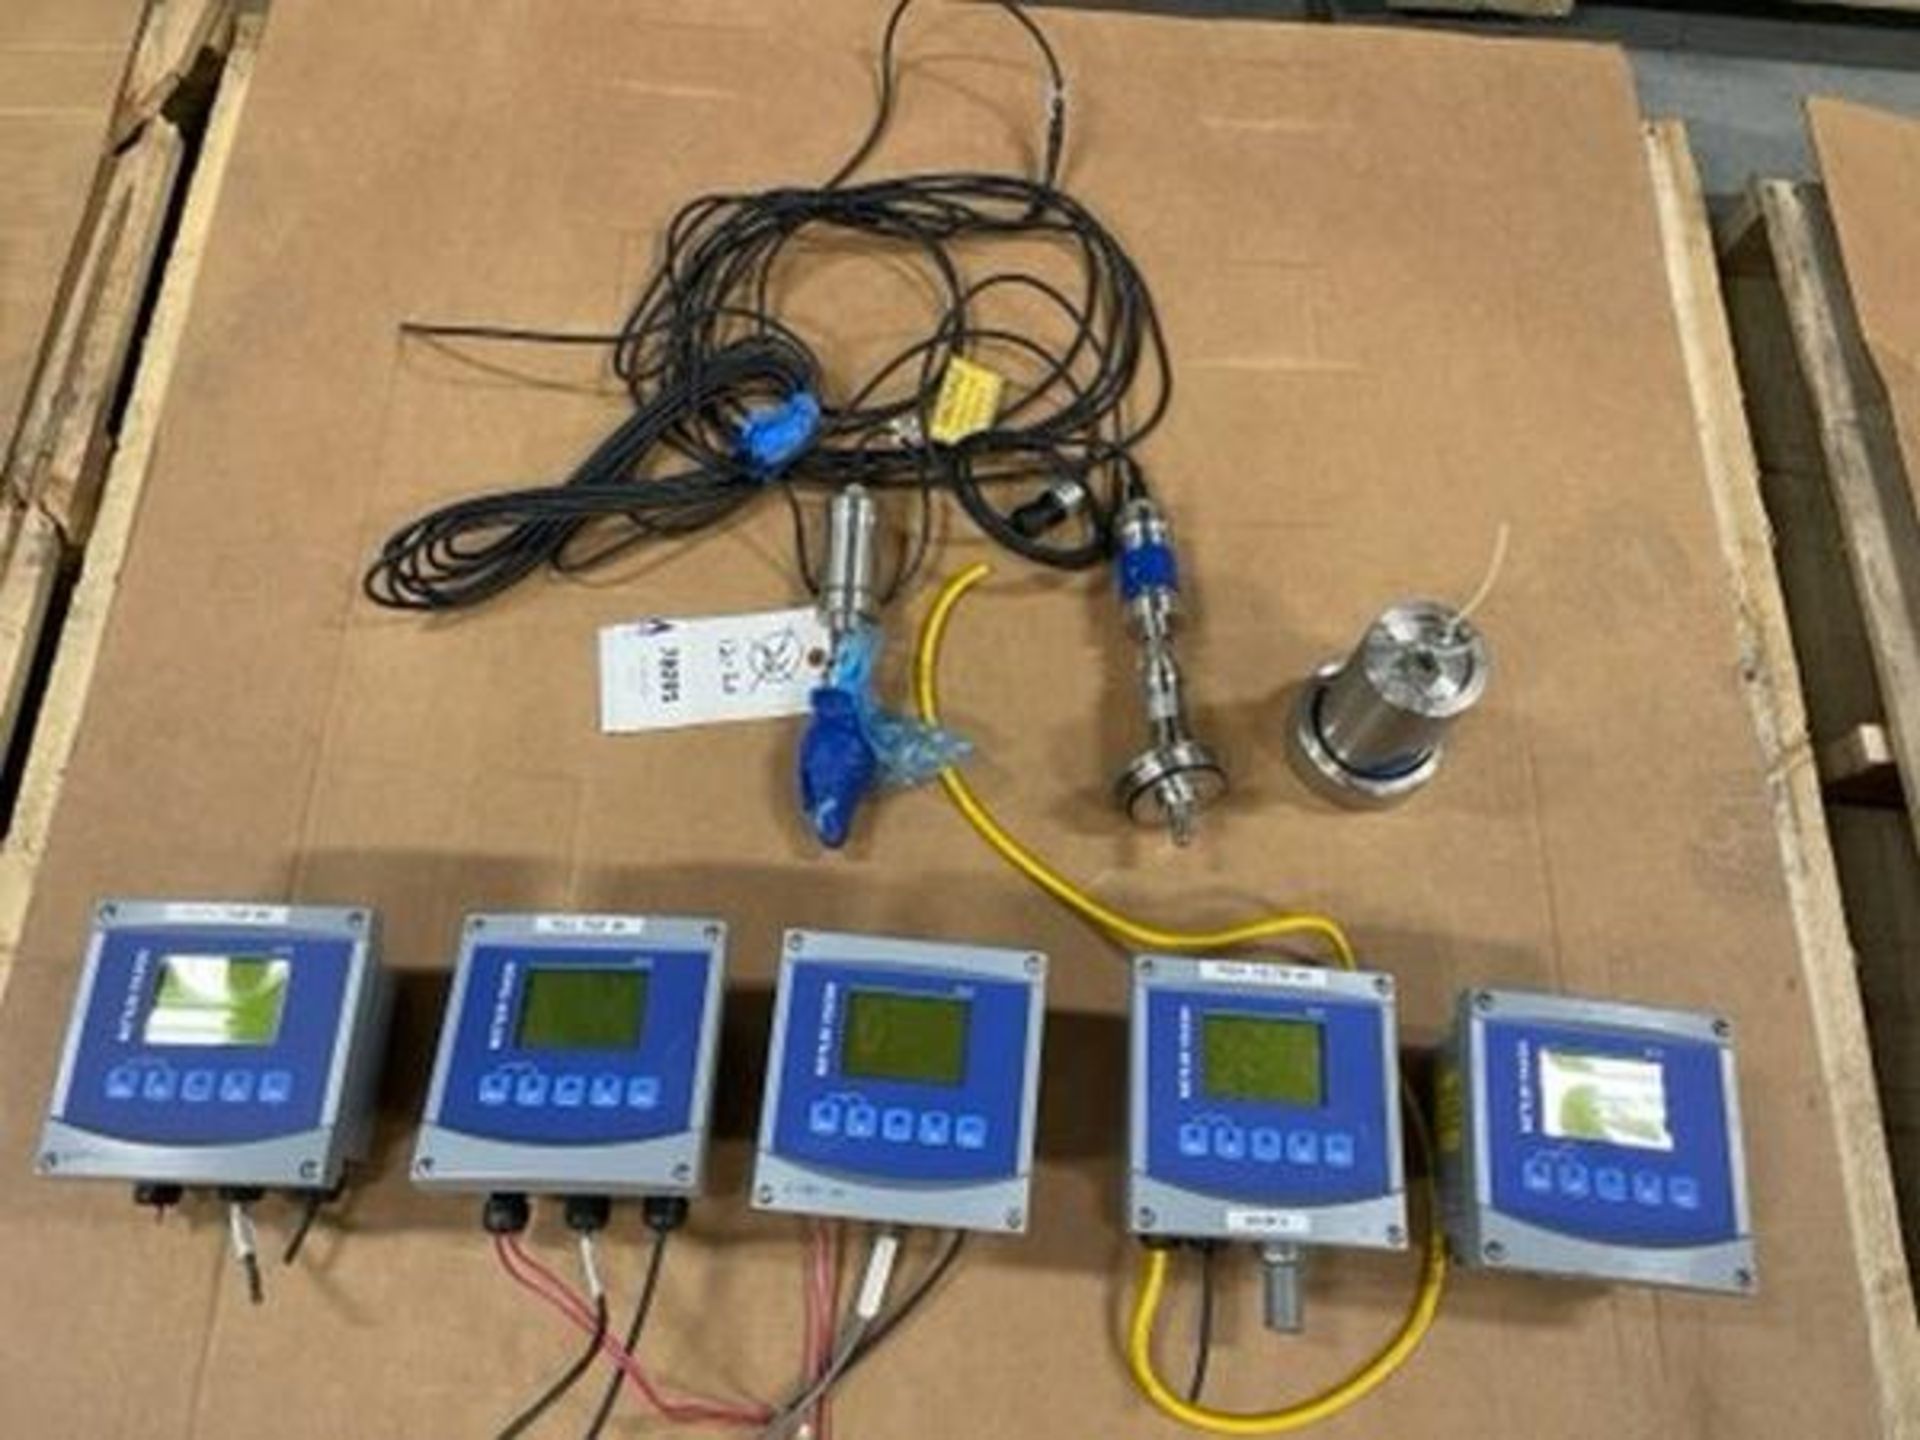 Lot of Mettler Toledo Test Equipment,Including (5) M400 Transmitters with (2) 02 & Other Sensors (